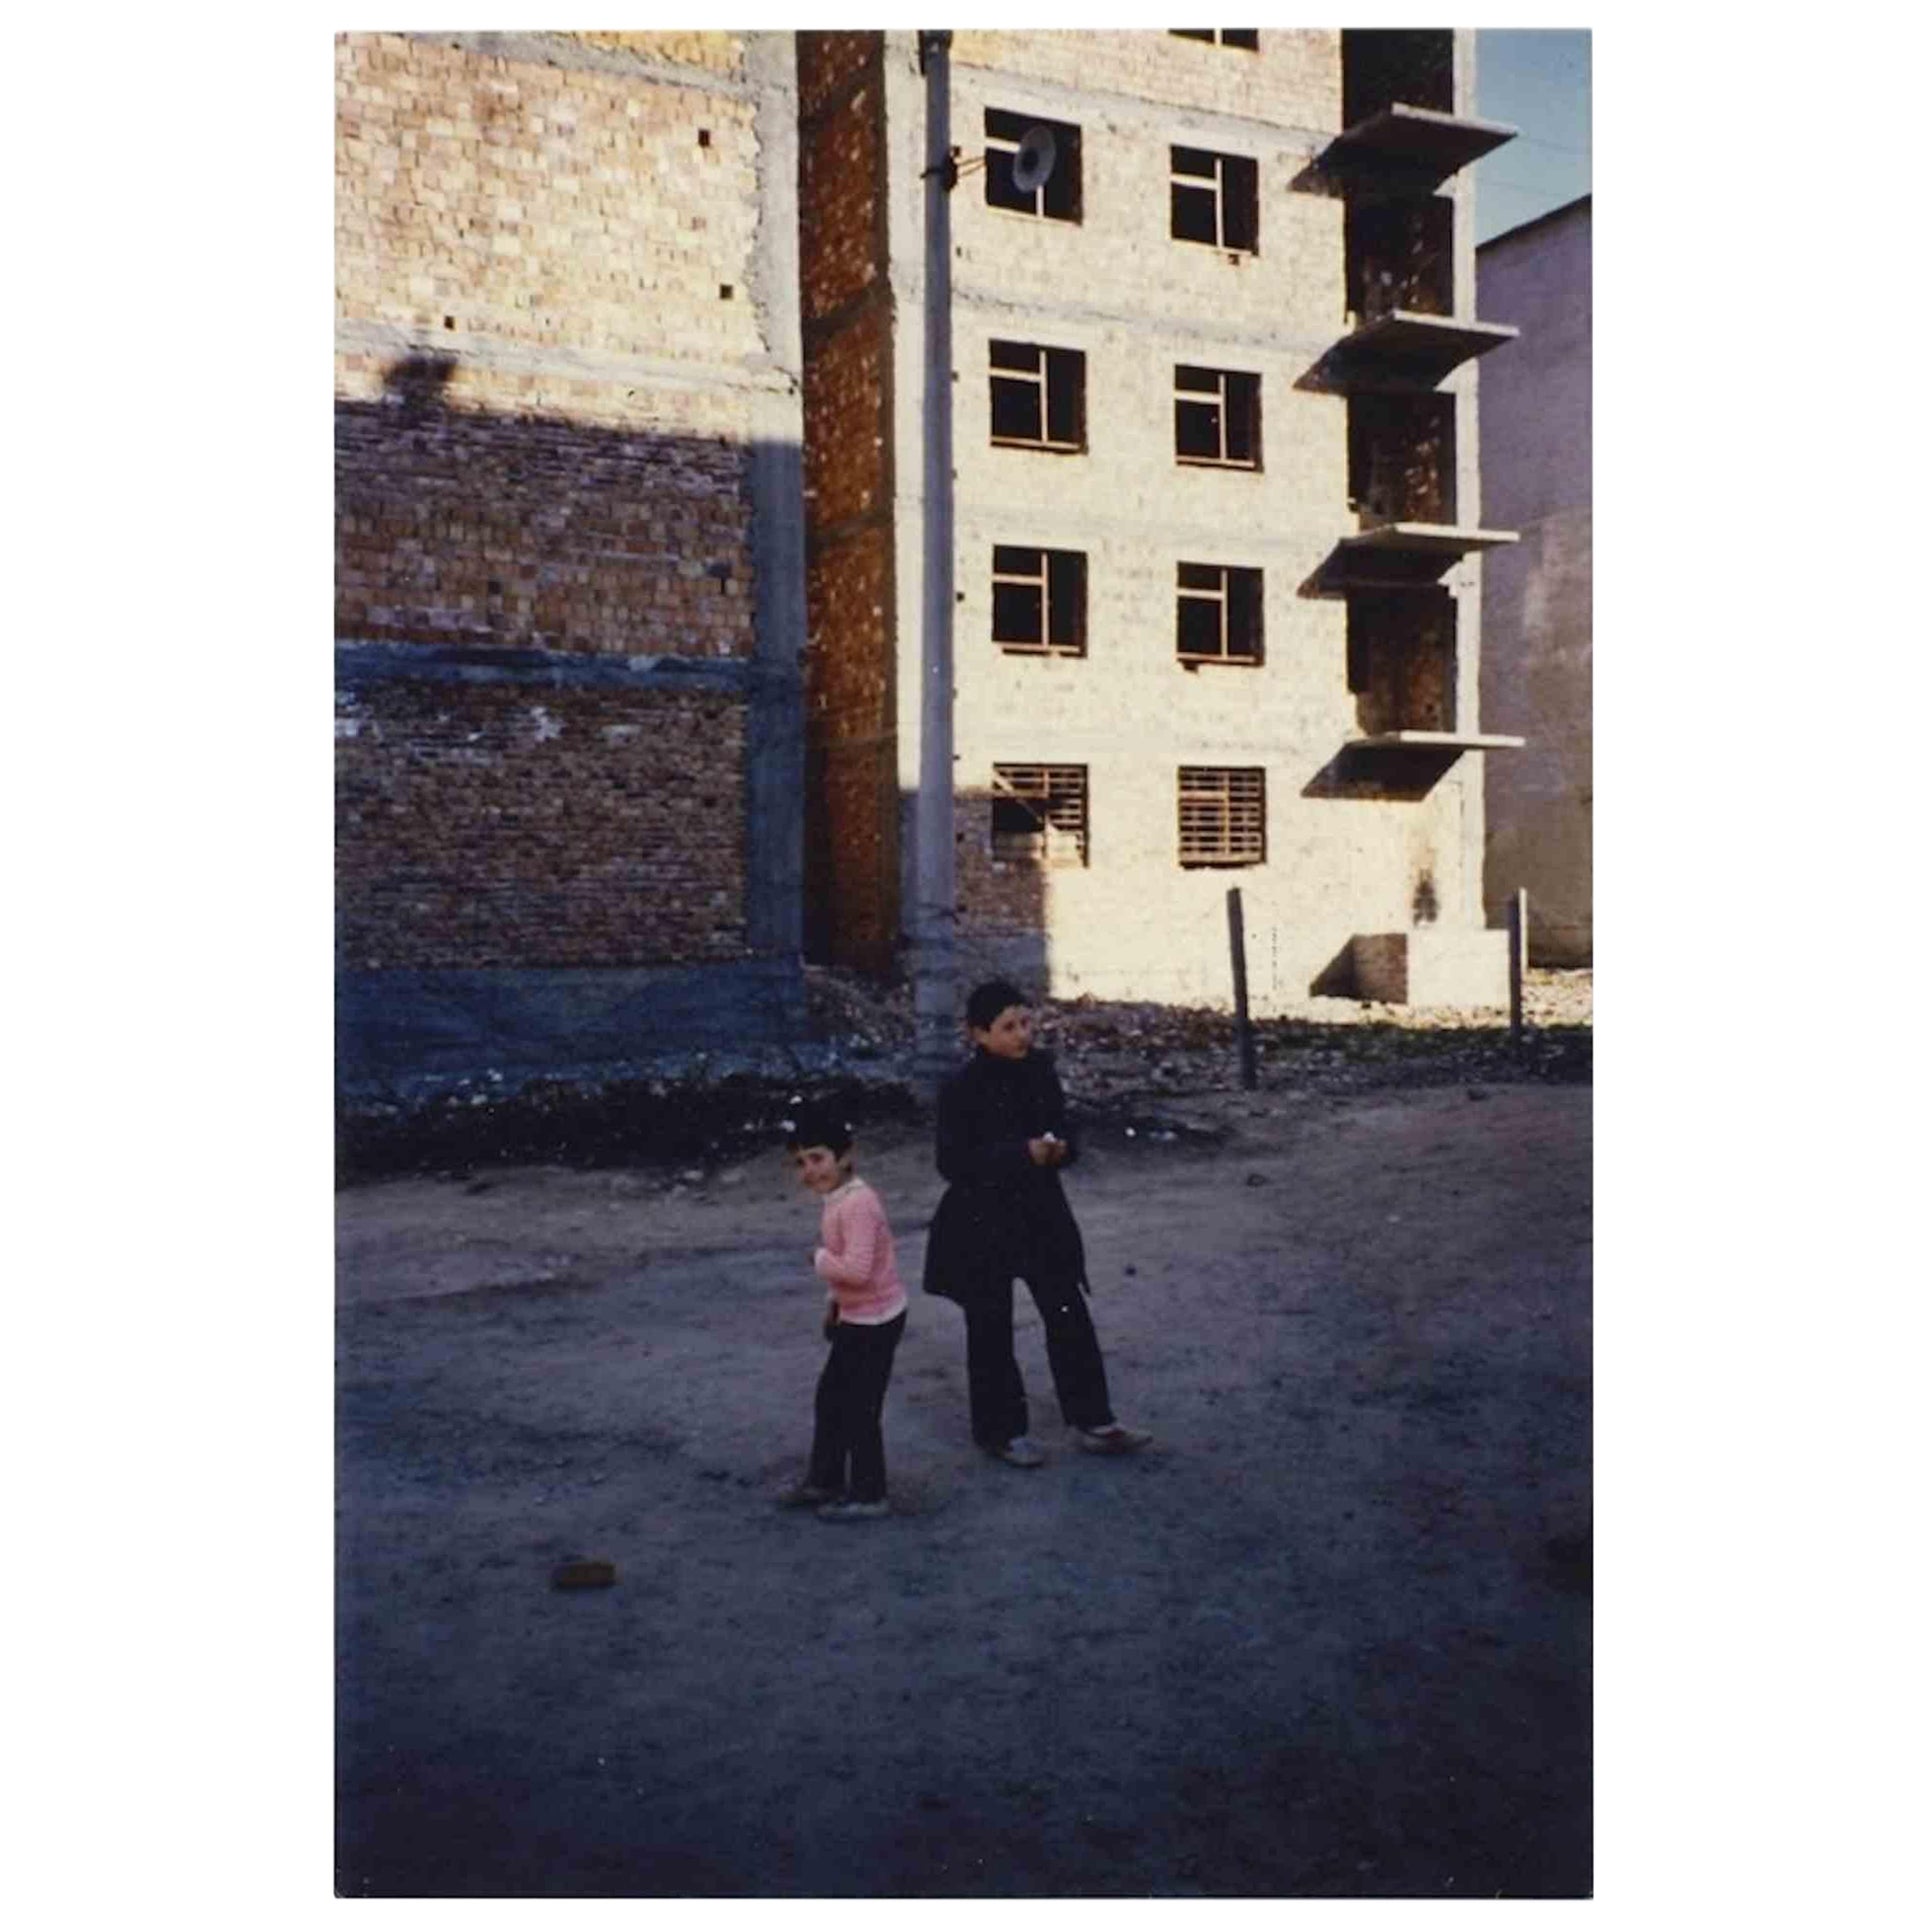 Reportage from Albania - Children in Tirana  - Vintage Photograph - Late 1970s